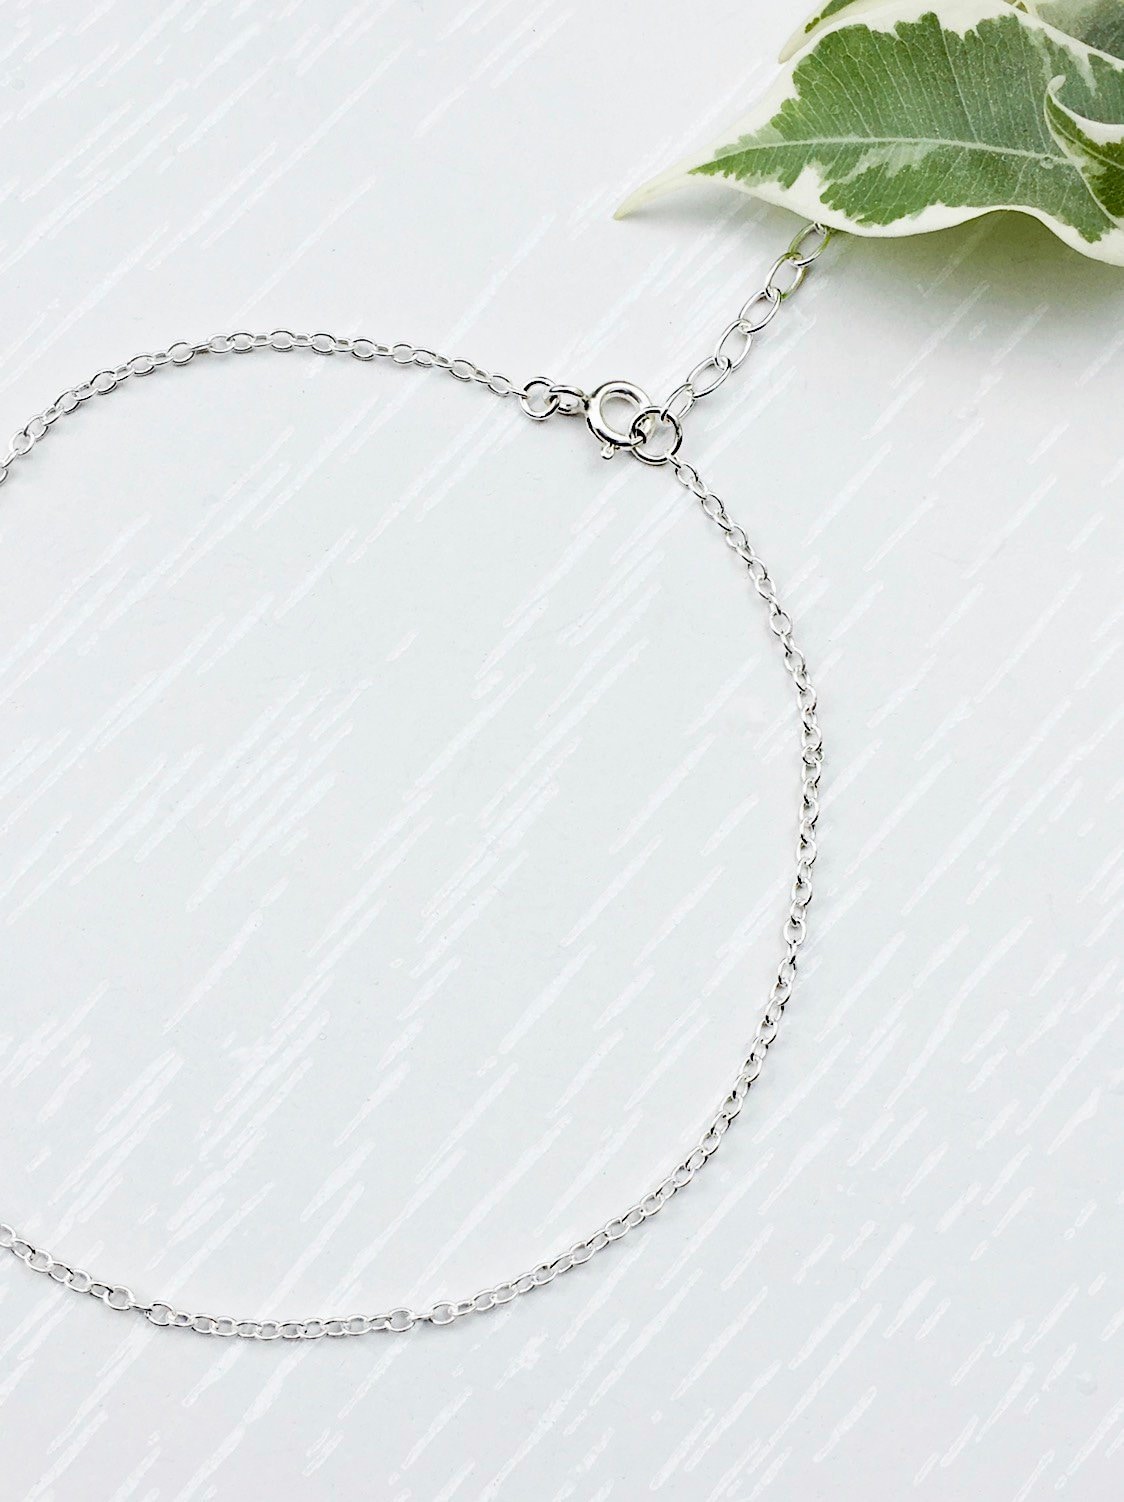 Pure Silver Bangle, Open Cuff Bracelet for Women, Bangle Bracelet, Plain  Silver Bangle, Stackable Bangle, Birthday Gift for Mom, Unique Gift - Etsy